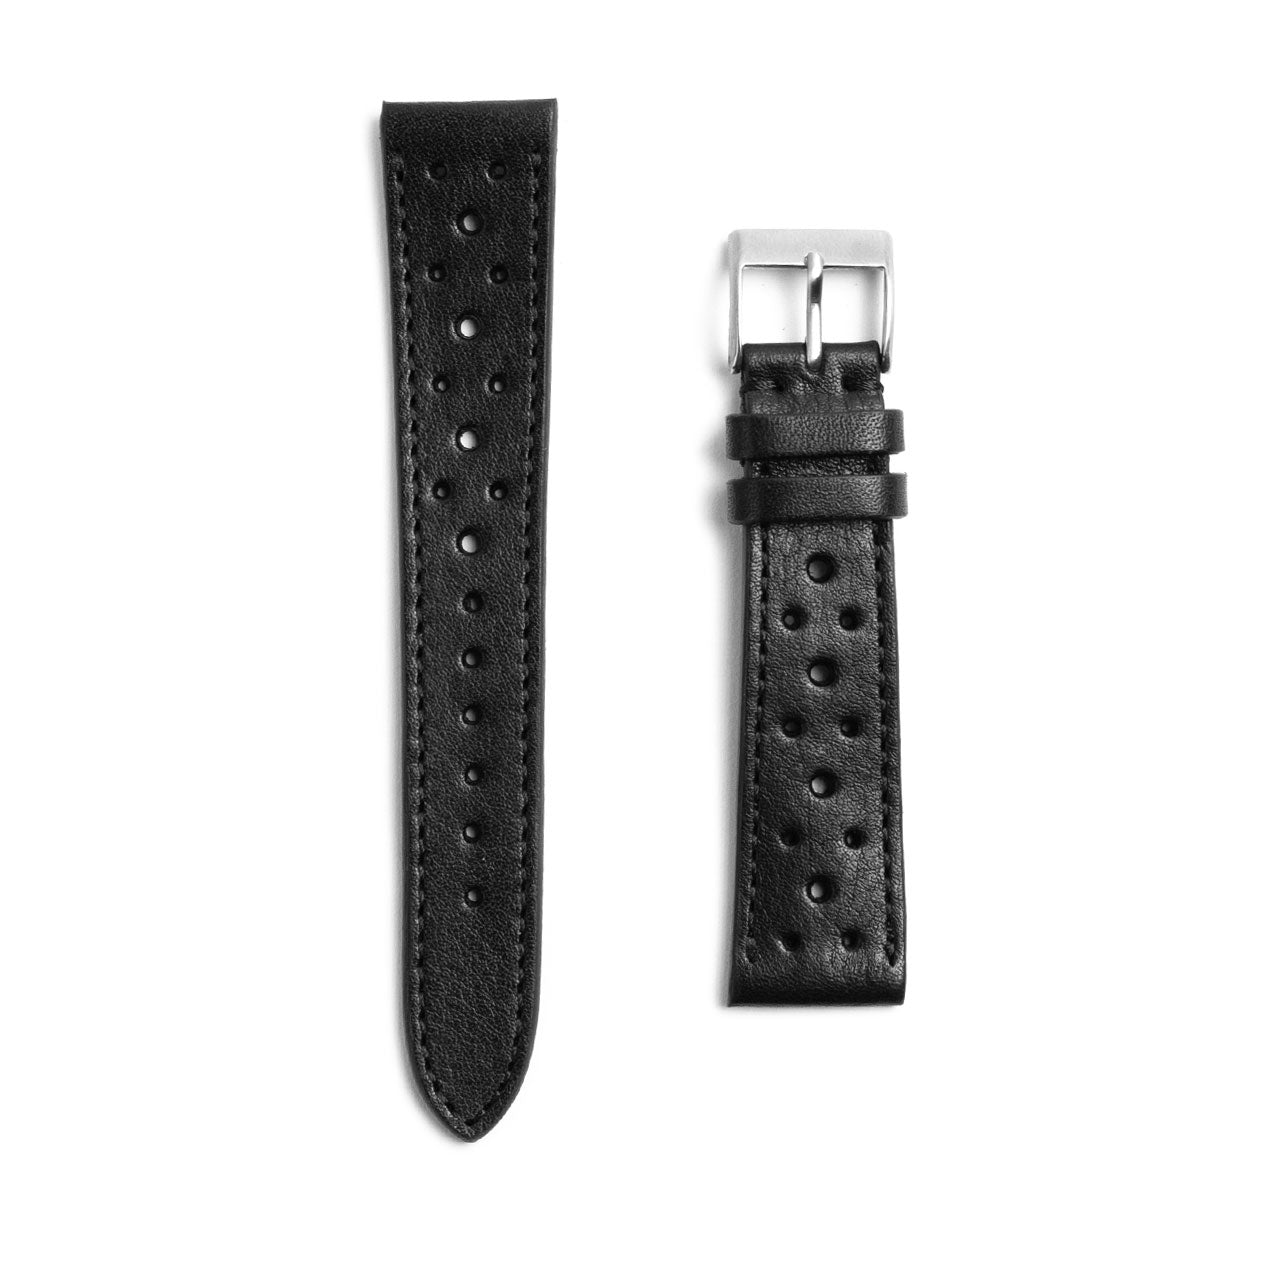 Black Leather Racing Watch Strap